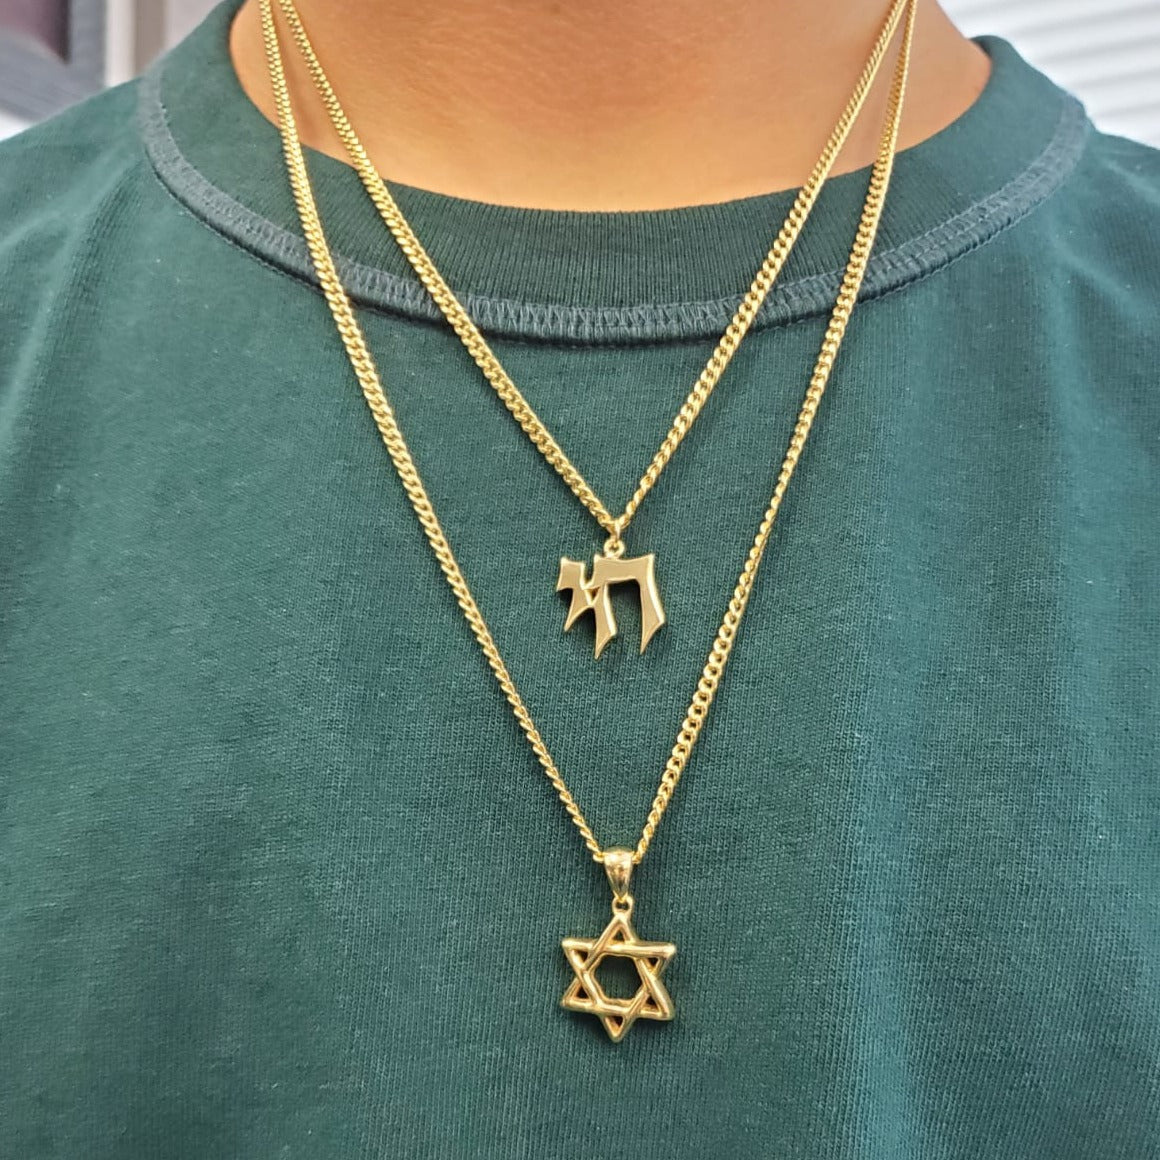 Is it disrespectful for non-Jews to wear a Chai necklace? - Quora